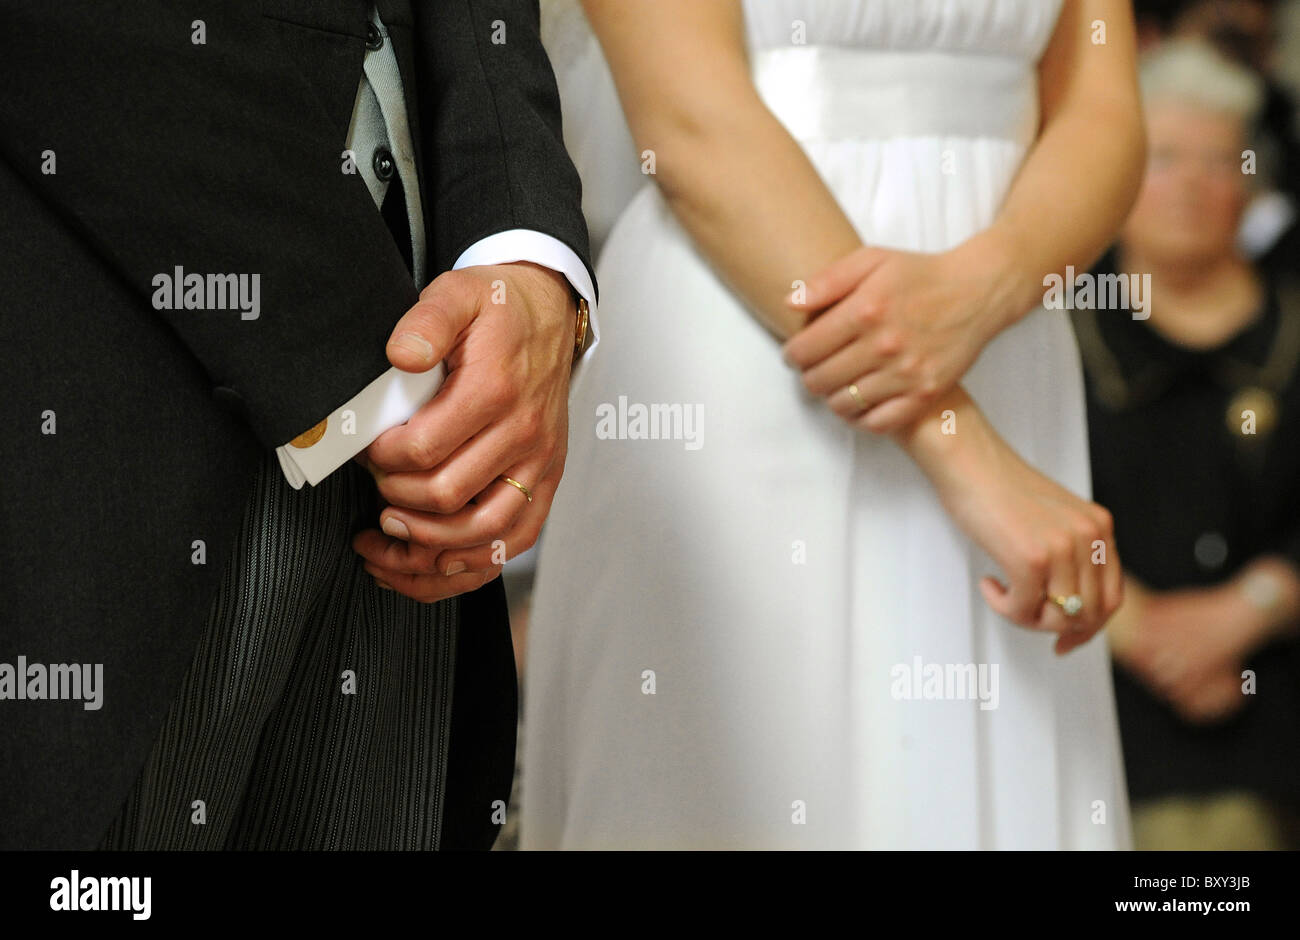 Mariage, mariage Banque D'Images